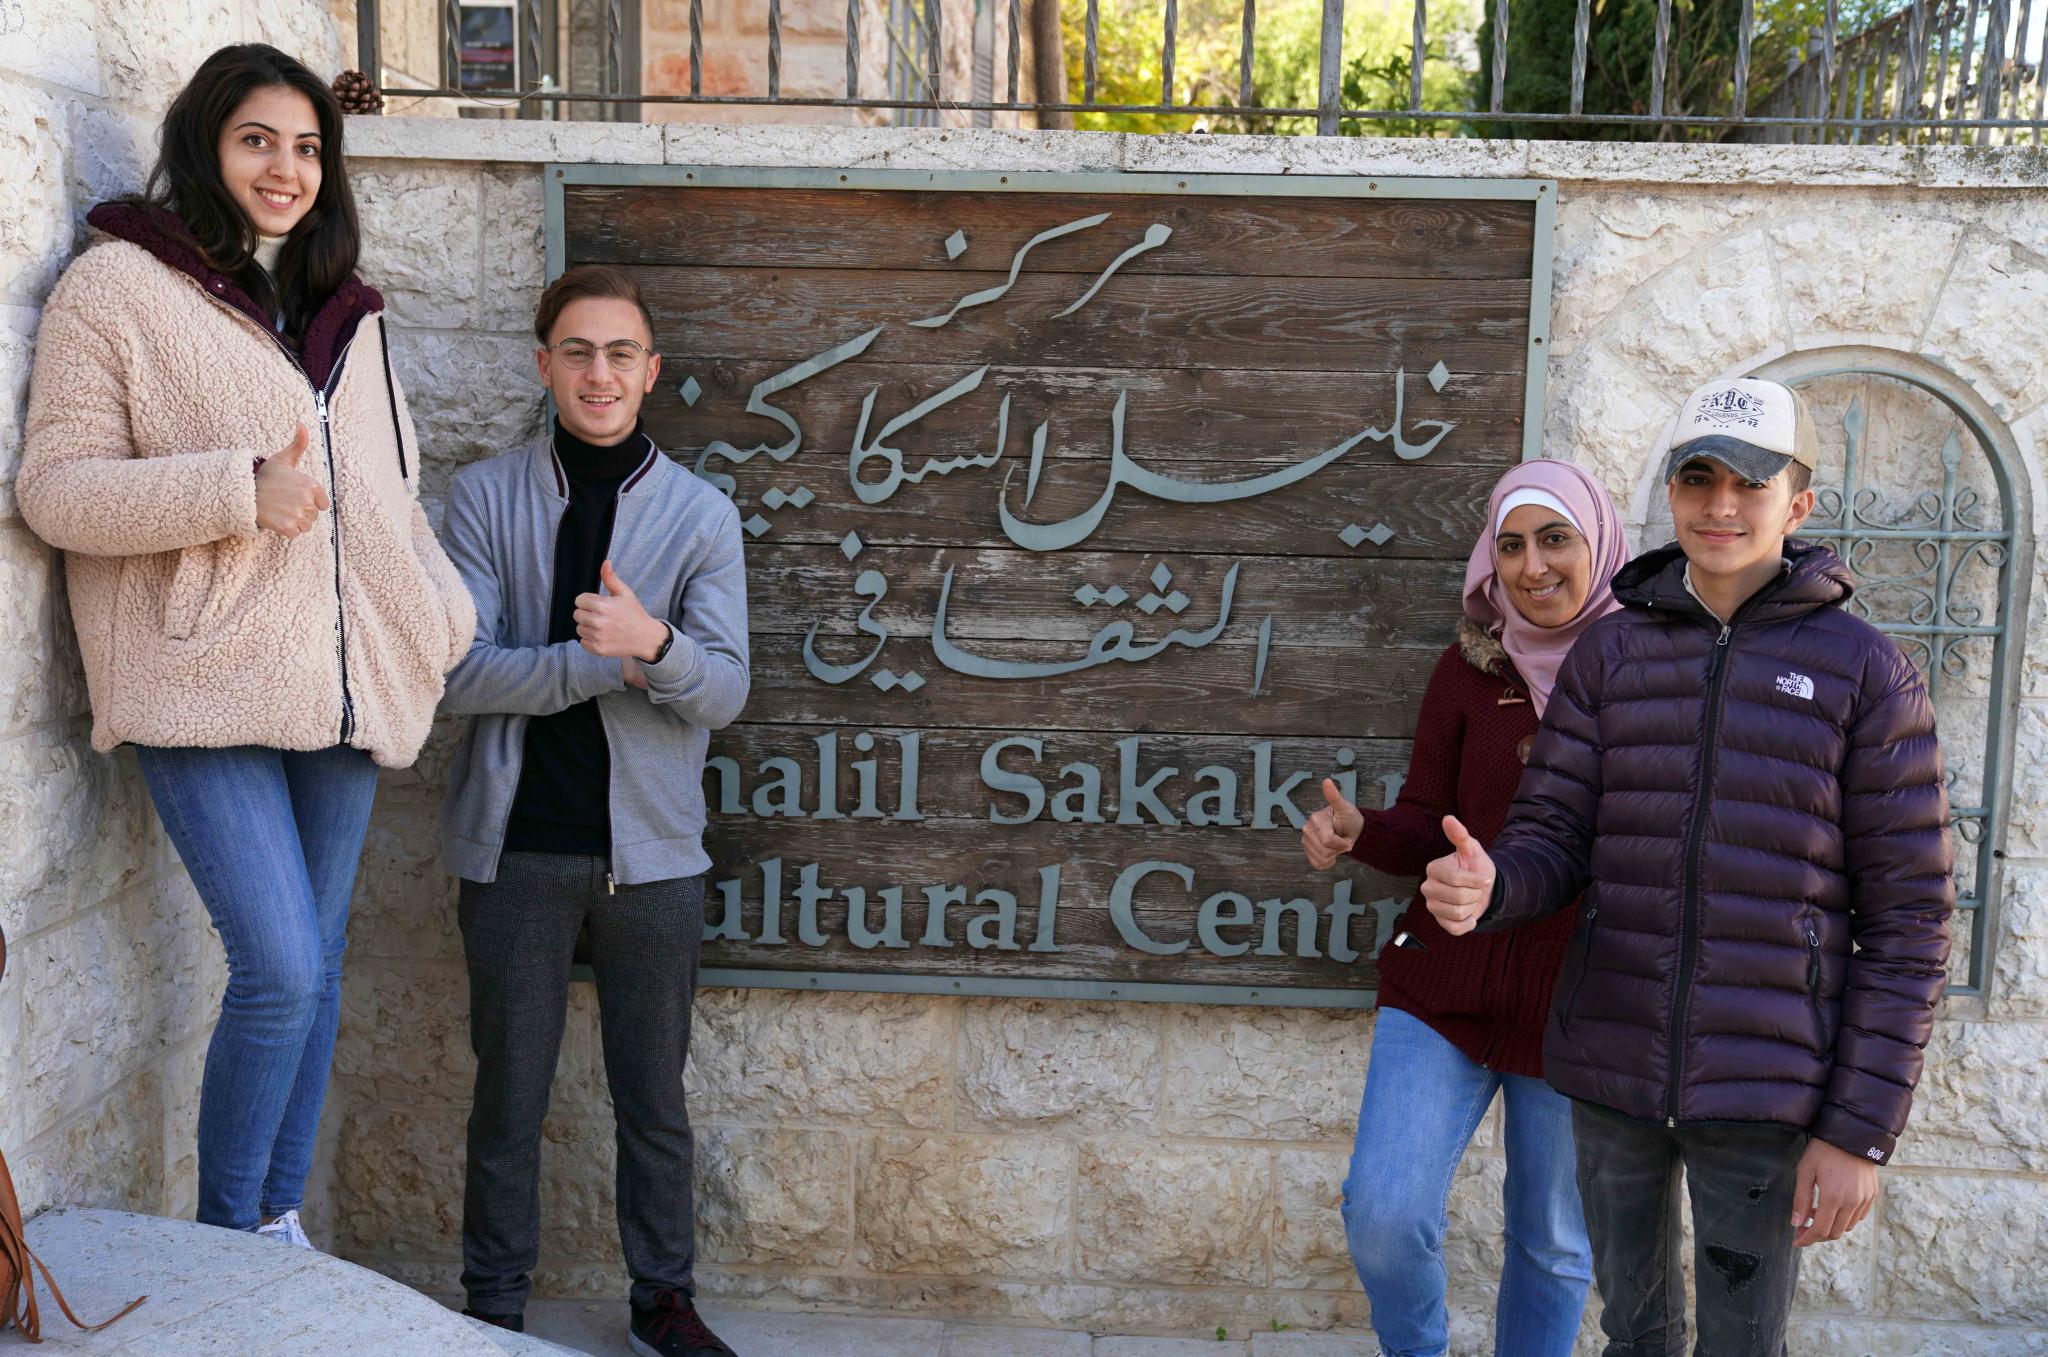 Interior Architecture Student in AAUP in a Field Trip to Khalil Sakakini Cultural Center